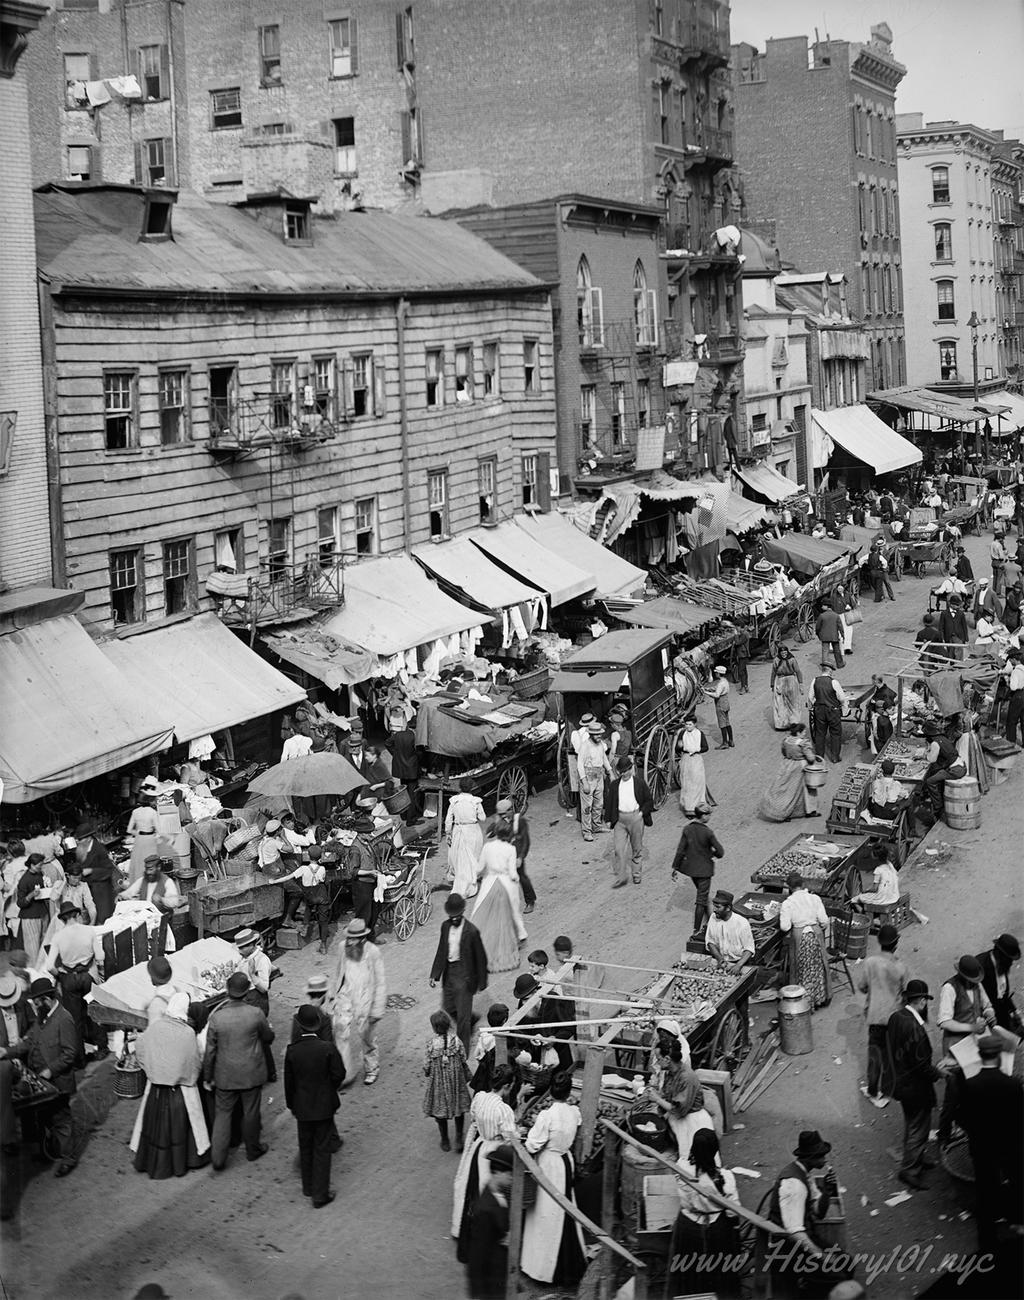 NYC 1890s: The Gilded Age Boom & Iconic Urban Shifts